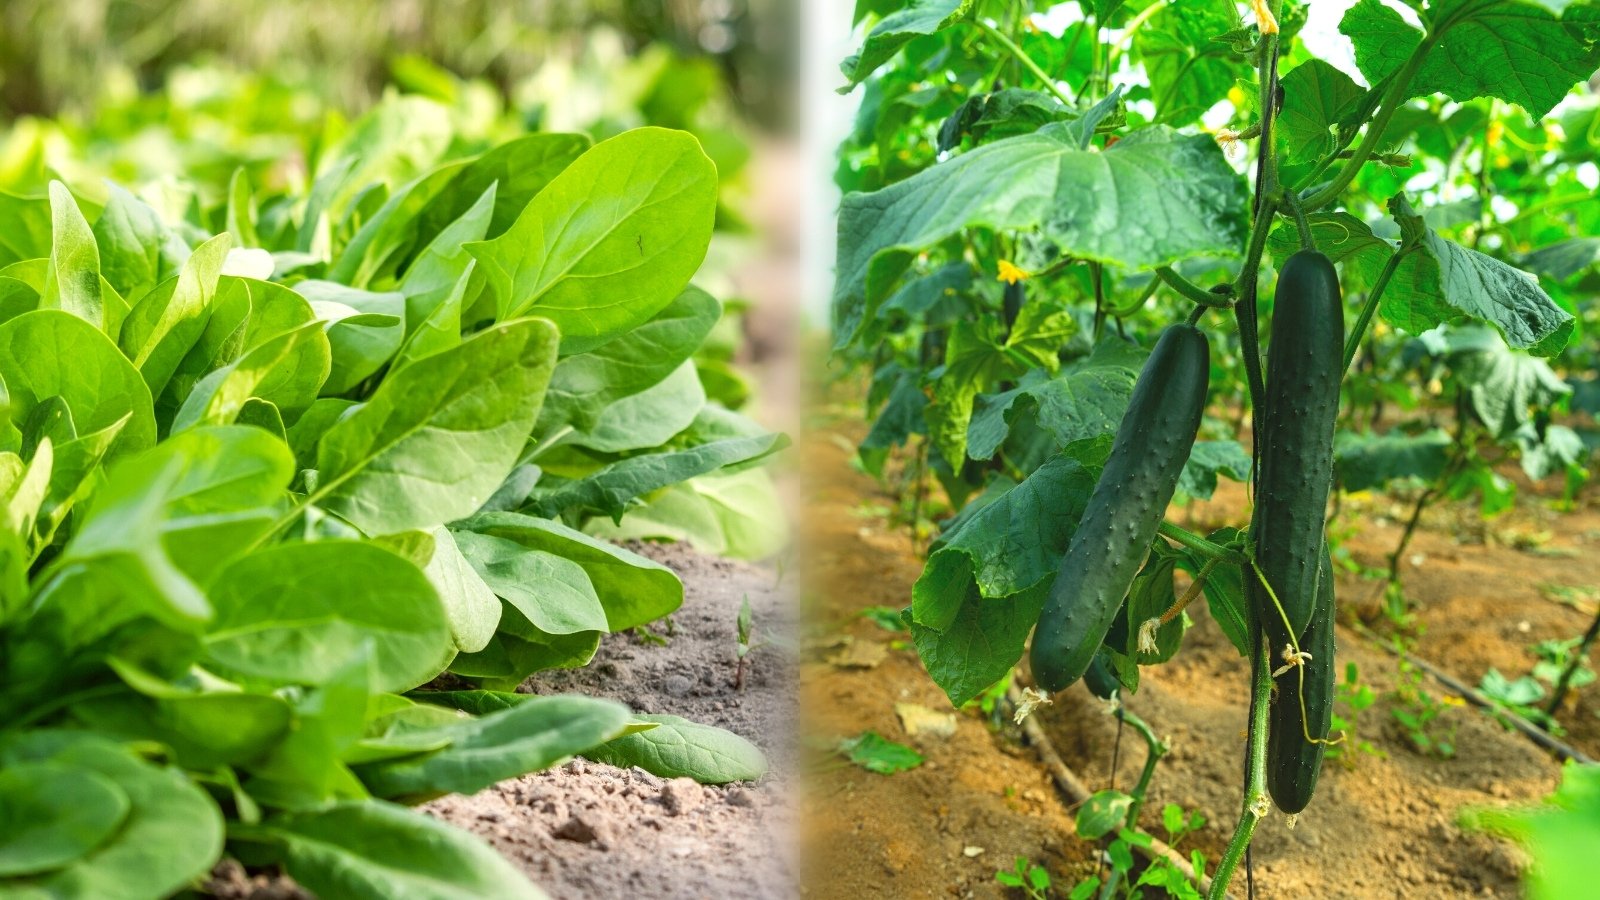 Should You Plant Spinach With Cucumbers?